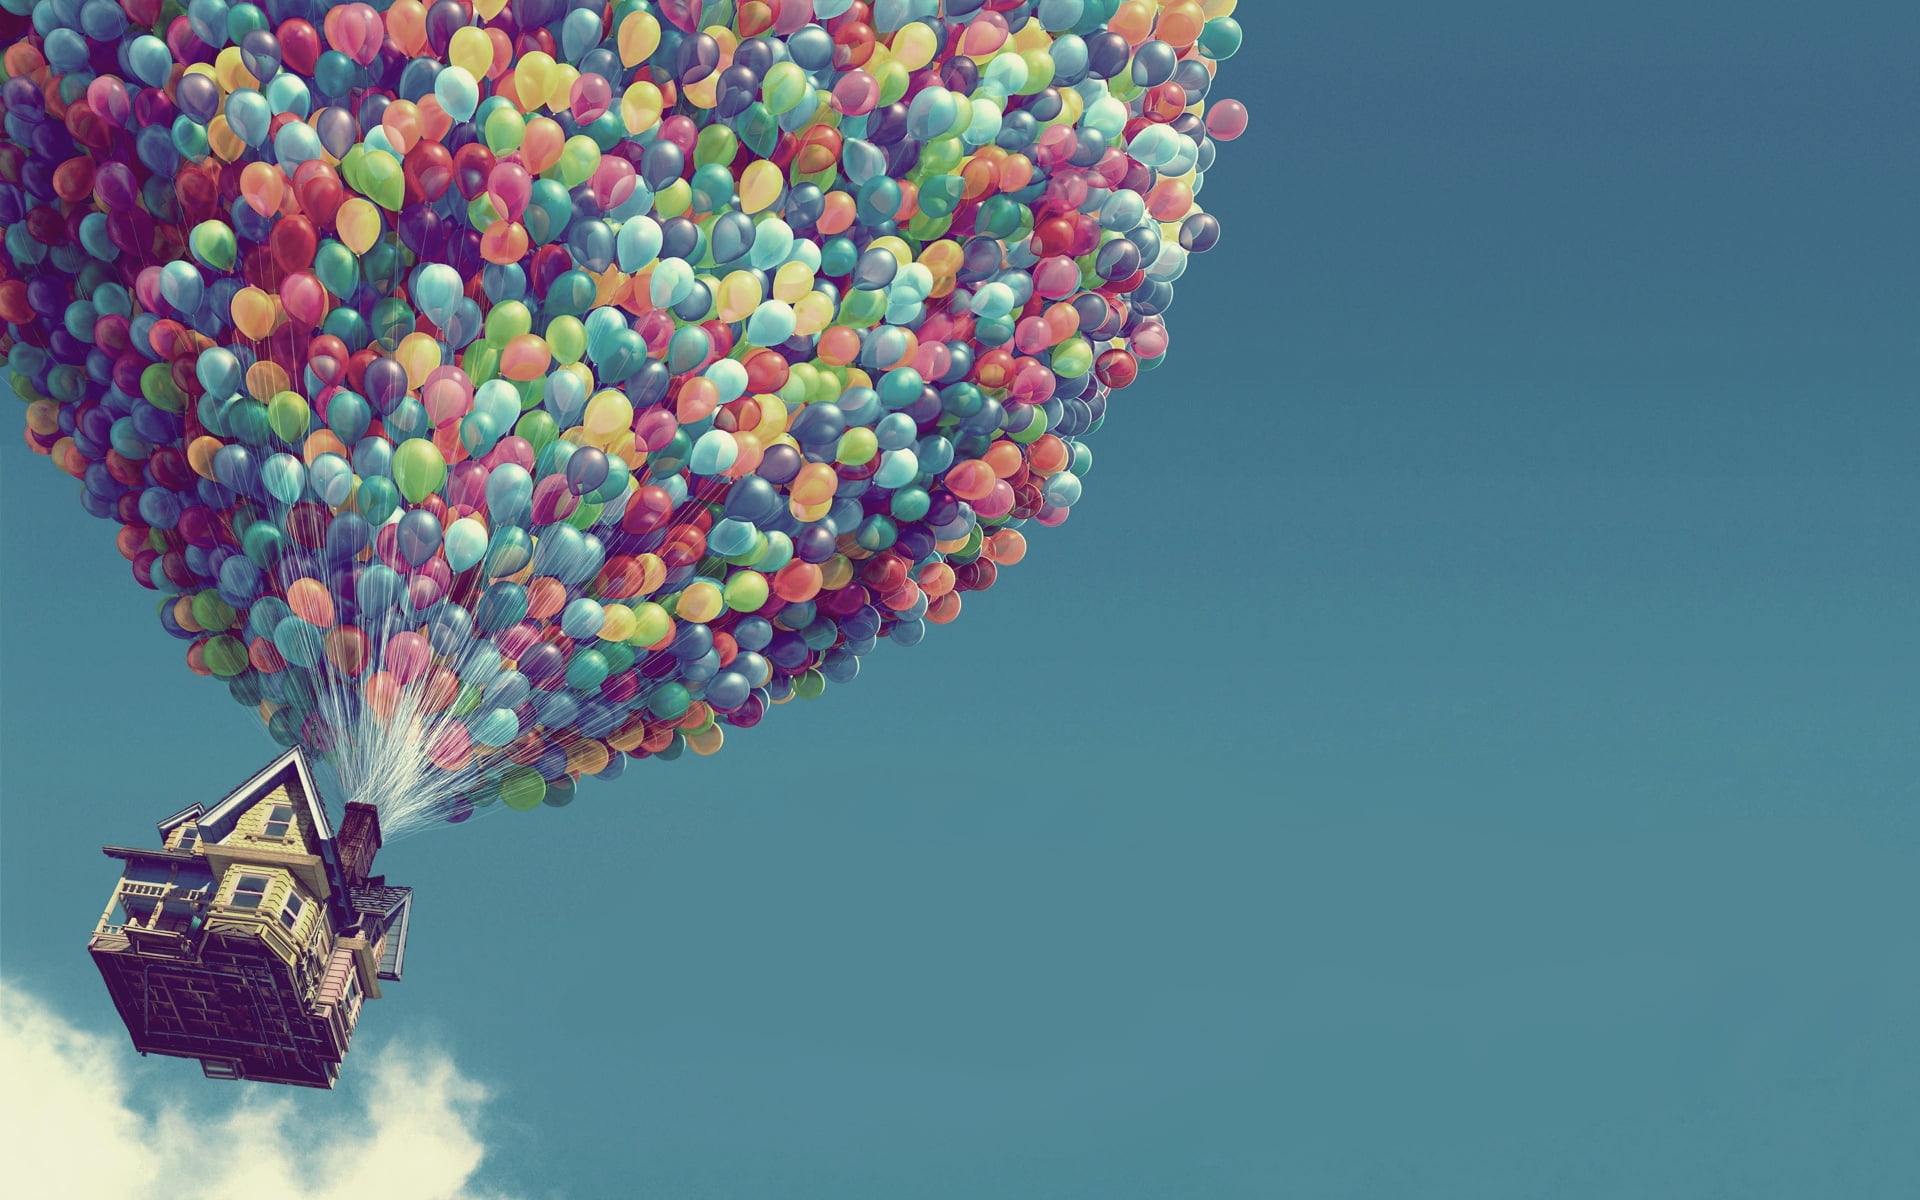 Up movie, balls, house, balloons, multi Colored, flying, blue